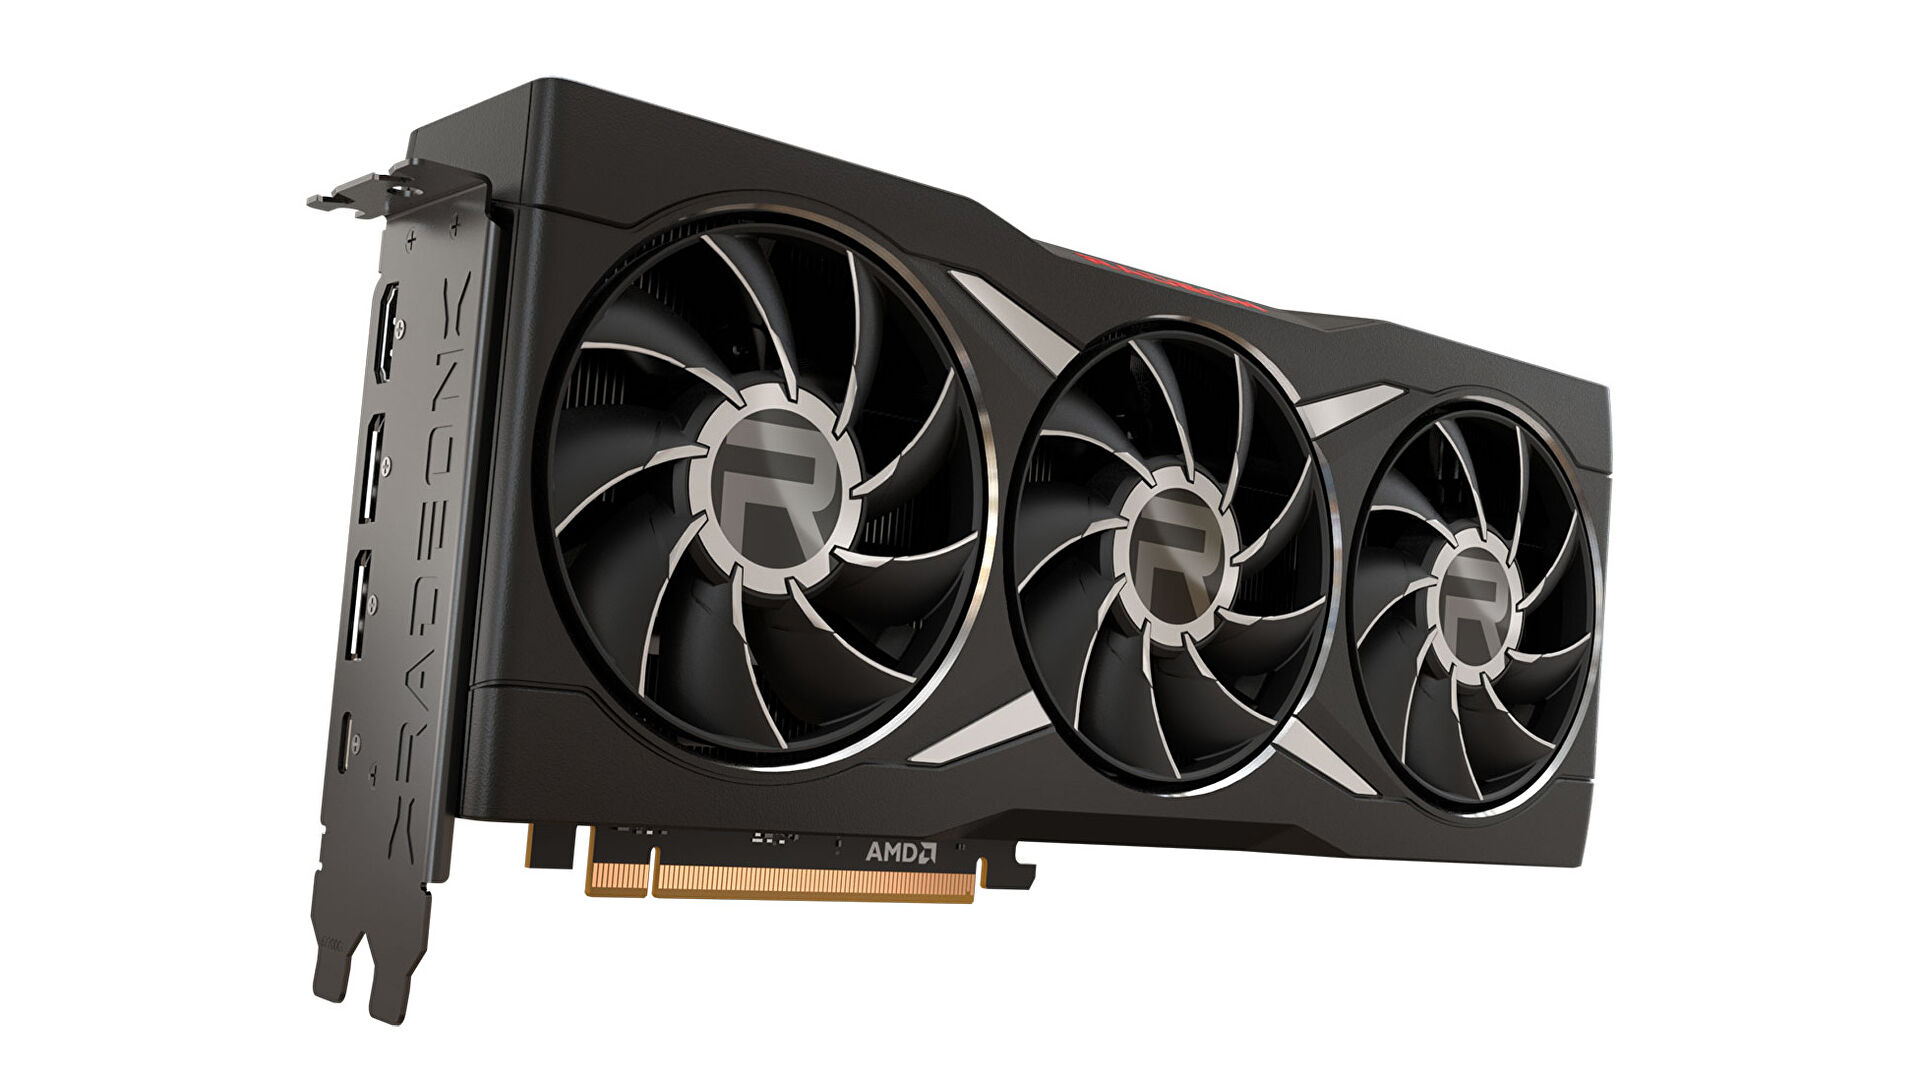 AMD’s fastest GPU, the RX 6950 XT, is £850 at Scan today